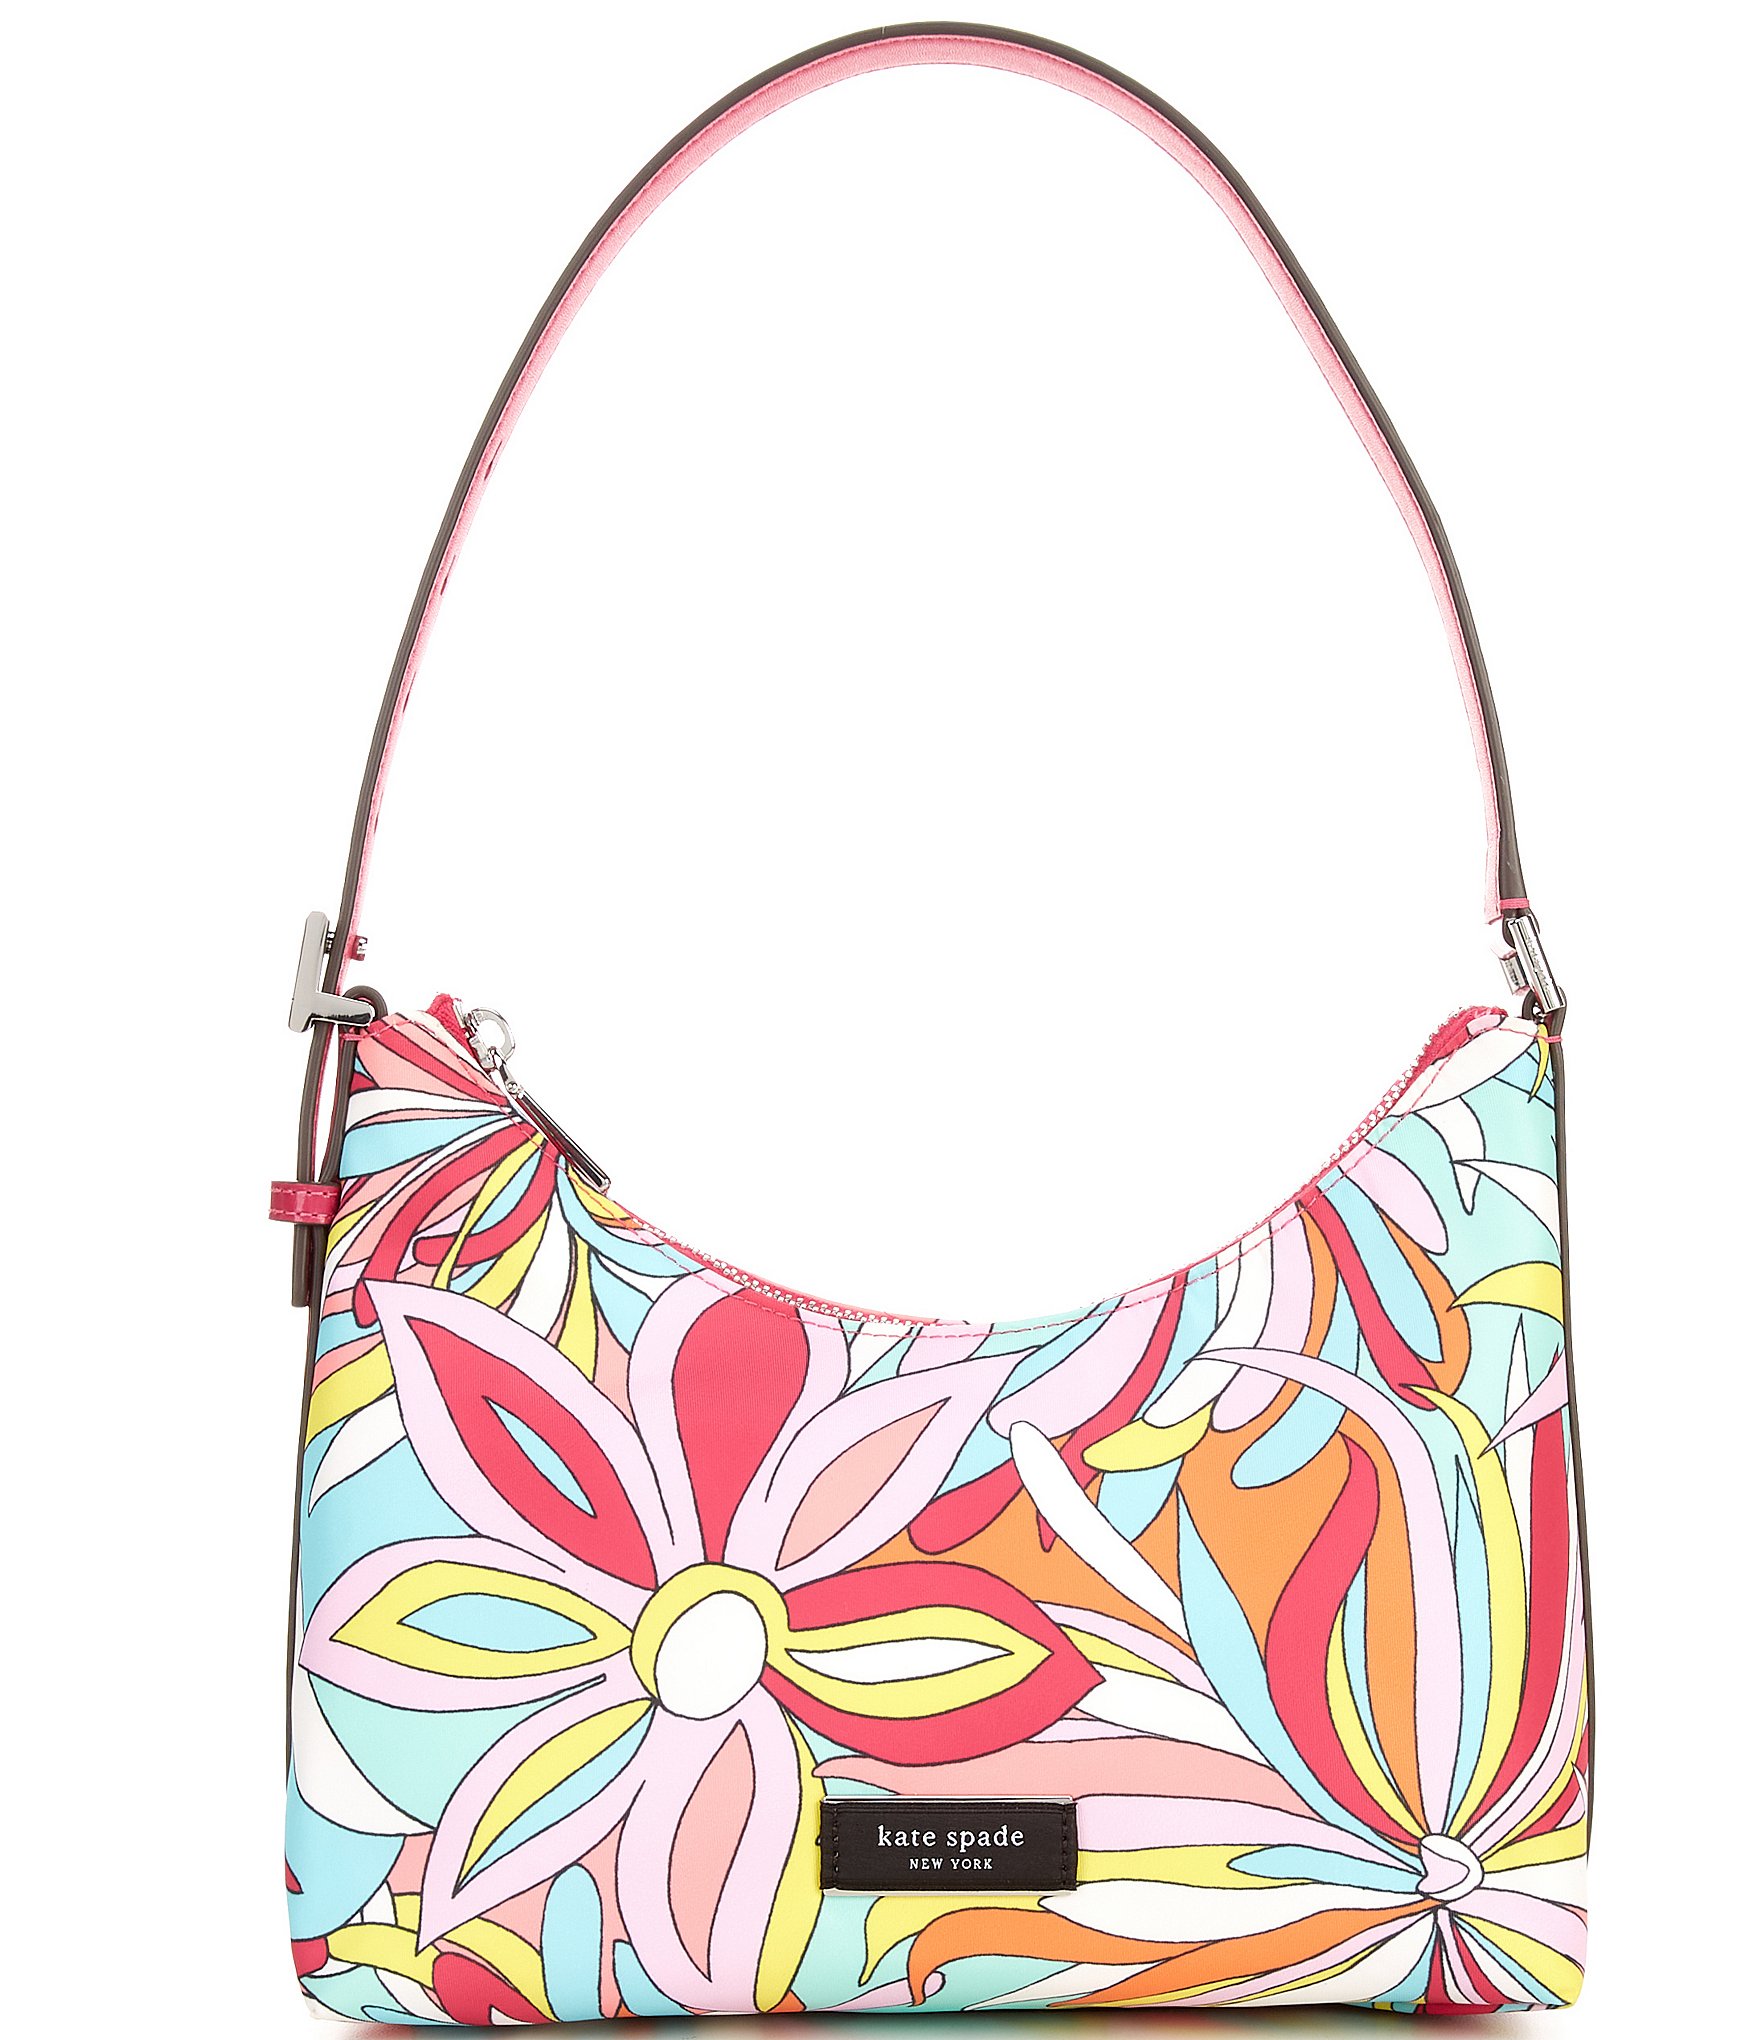 Kate Spade New York Becca Floral Tote